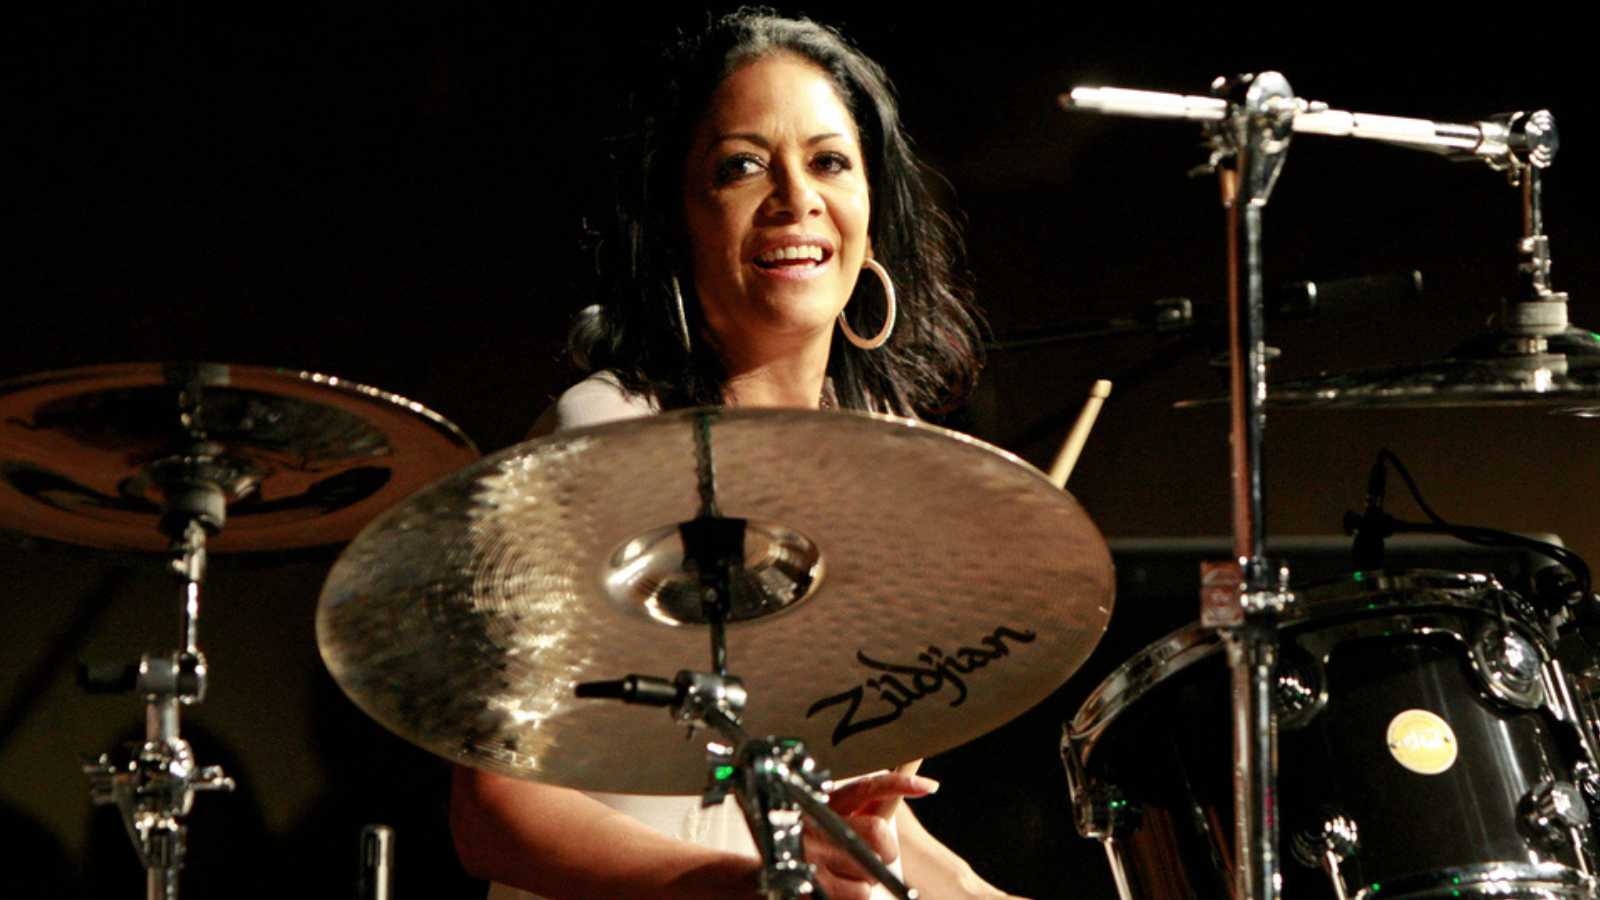 SANTA YNEZ, CA - MAY 30: Sheila E at 'Rhythm on the Vine' charity event to benefit Shriners Children Hospital at the Gainey Vineyard May 30, 2009 in Santa Ynez, California